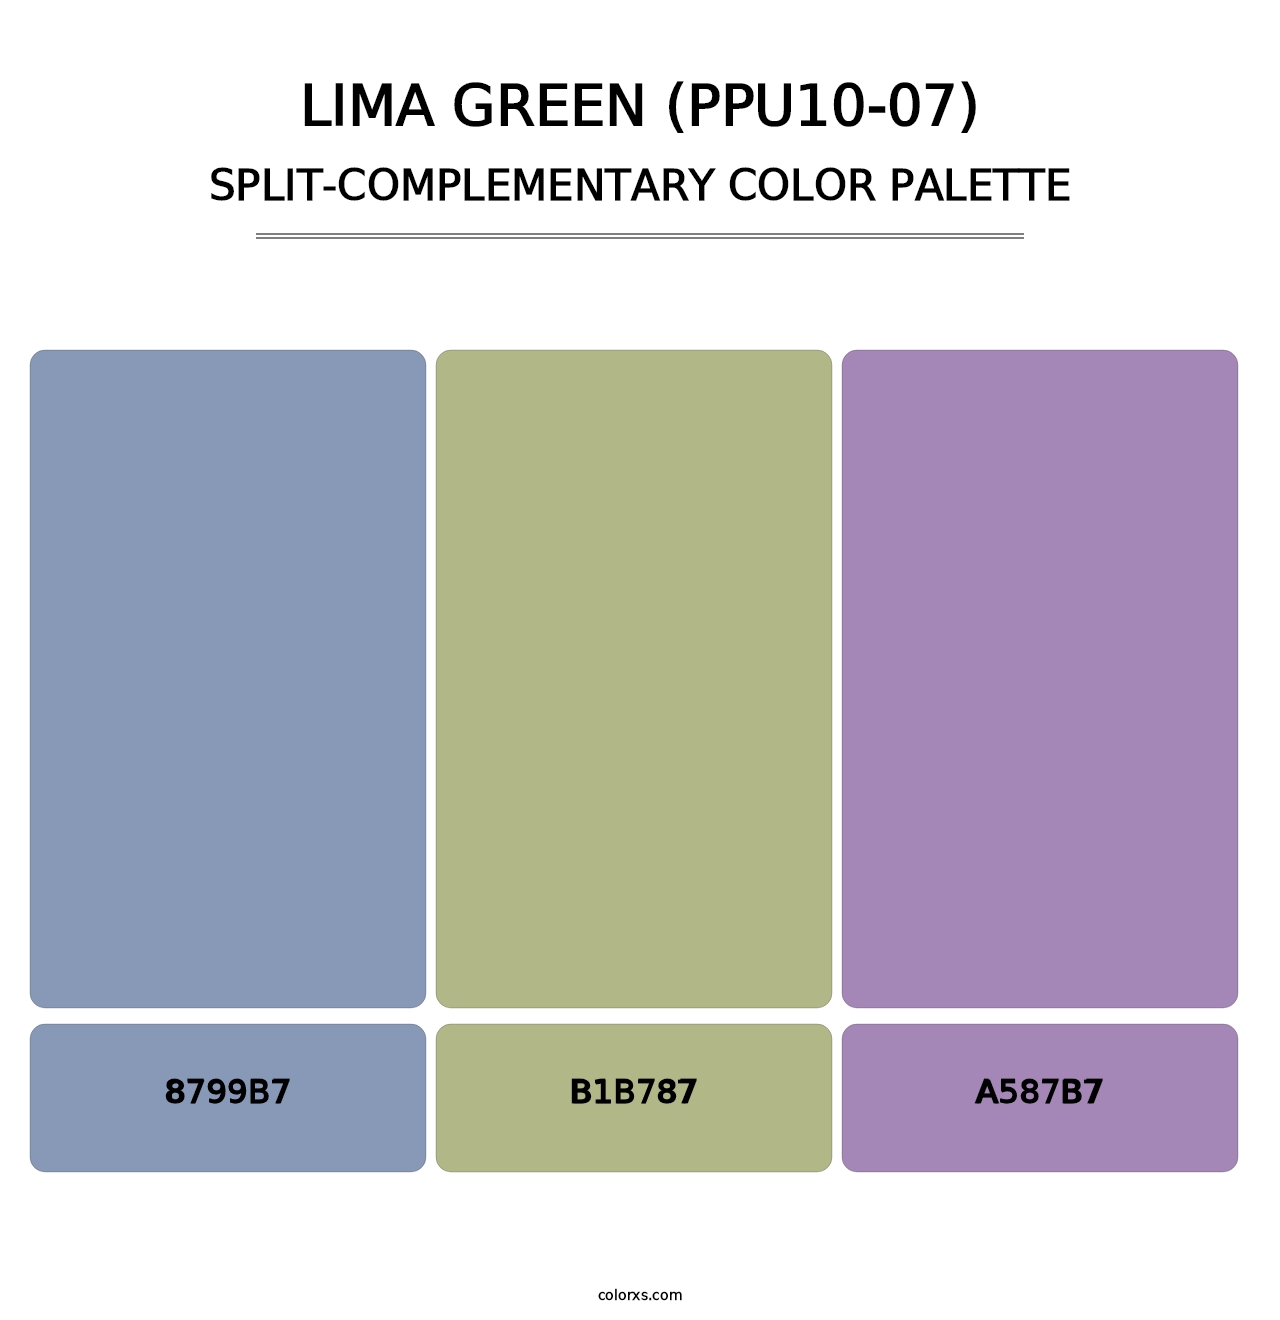 Lima Green (PPU10-07) - Split-Complementary Color Palette